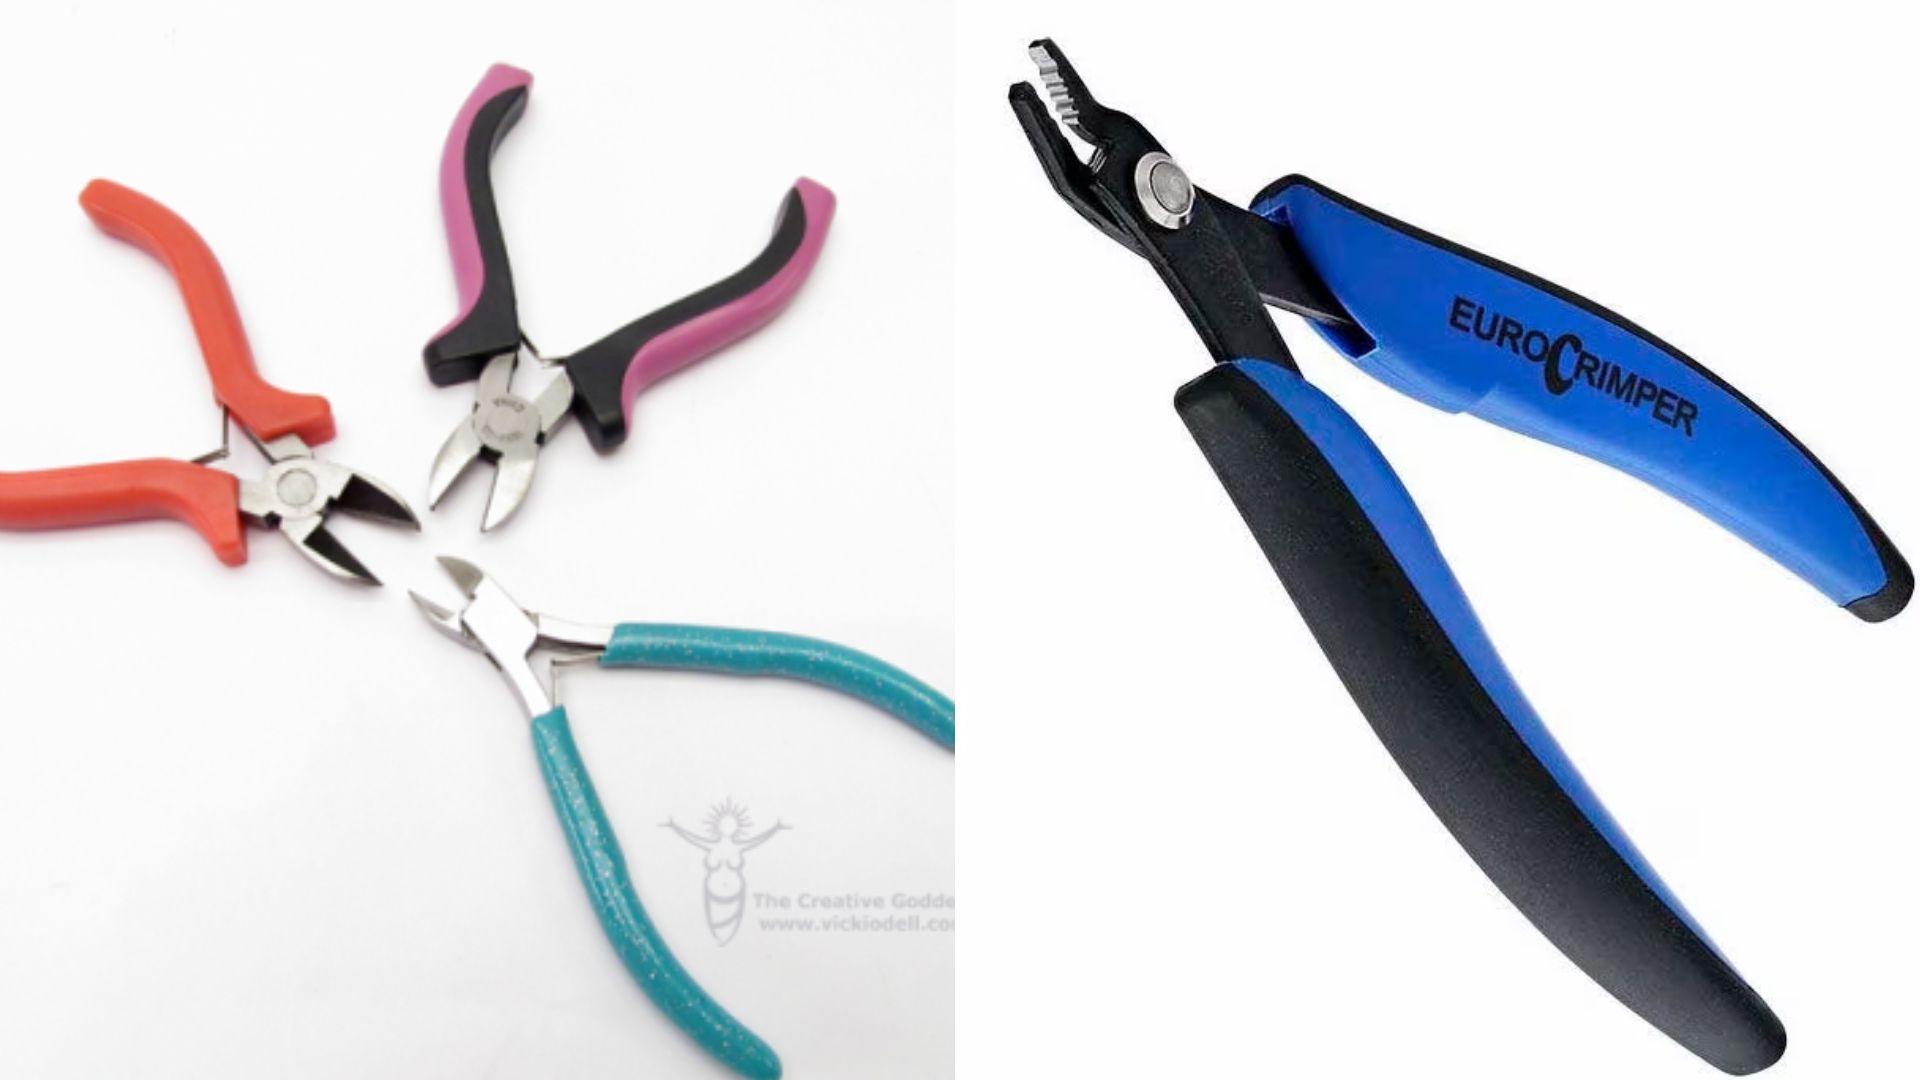 4 types of crimping tools for jewelry.